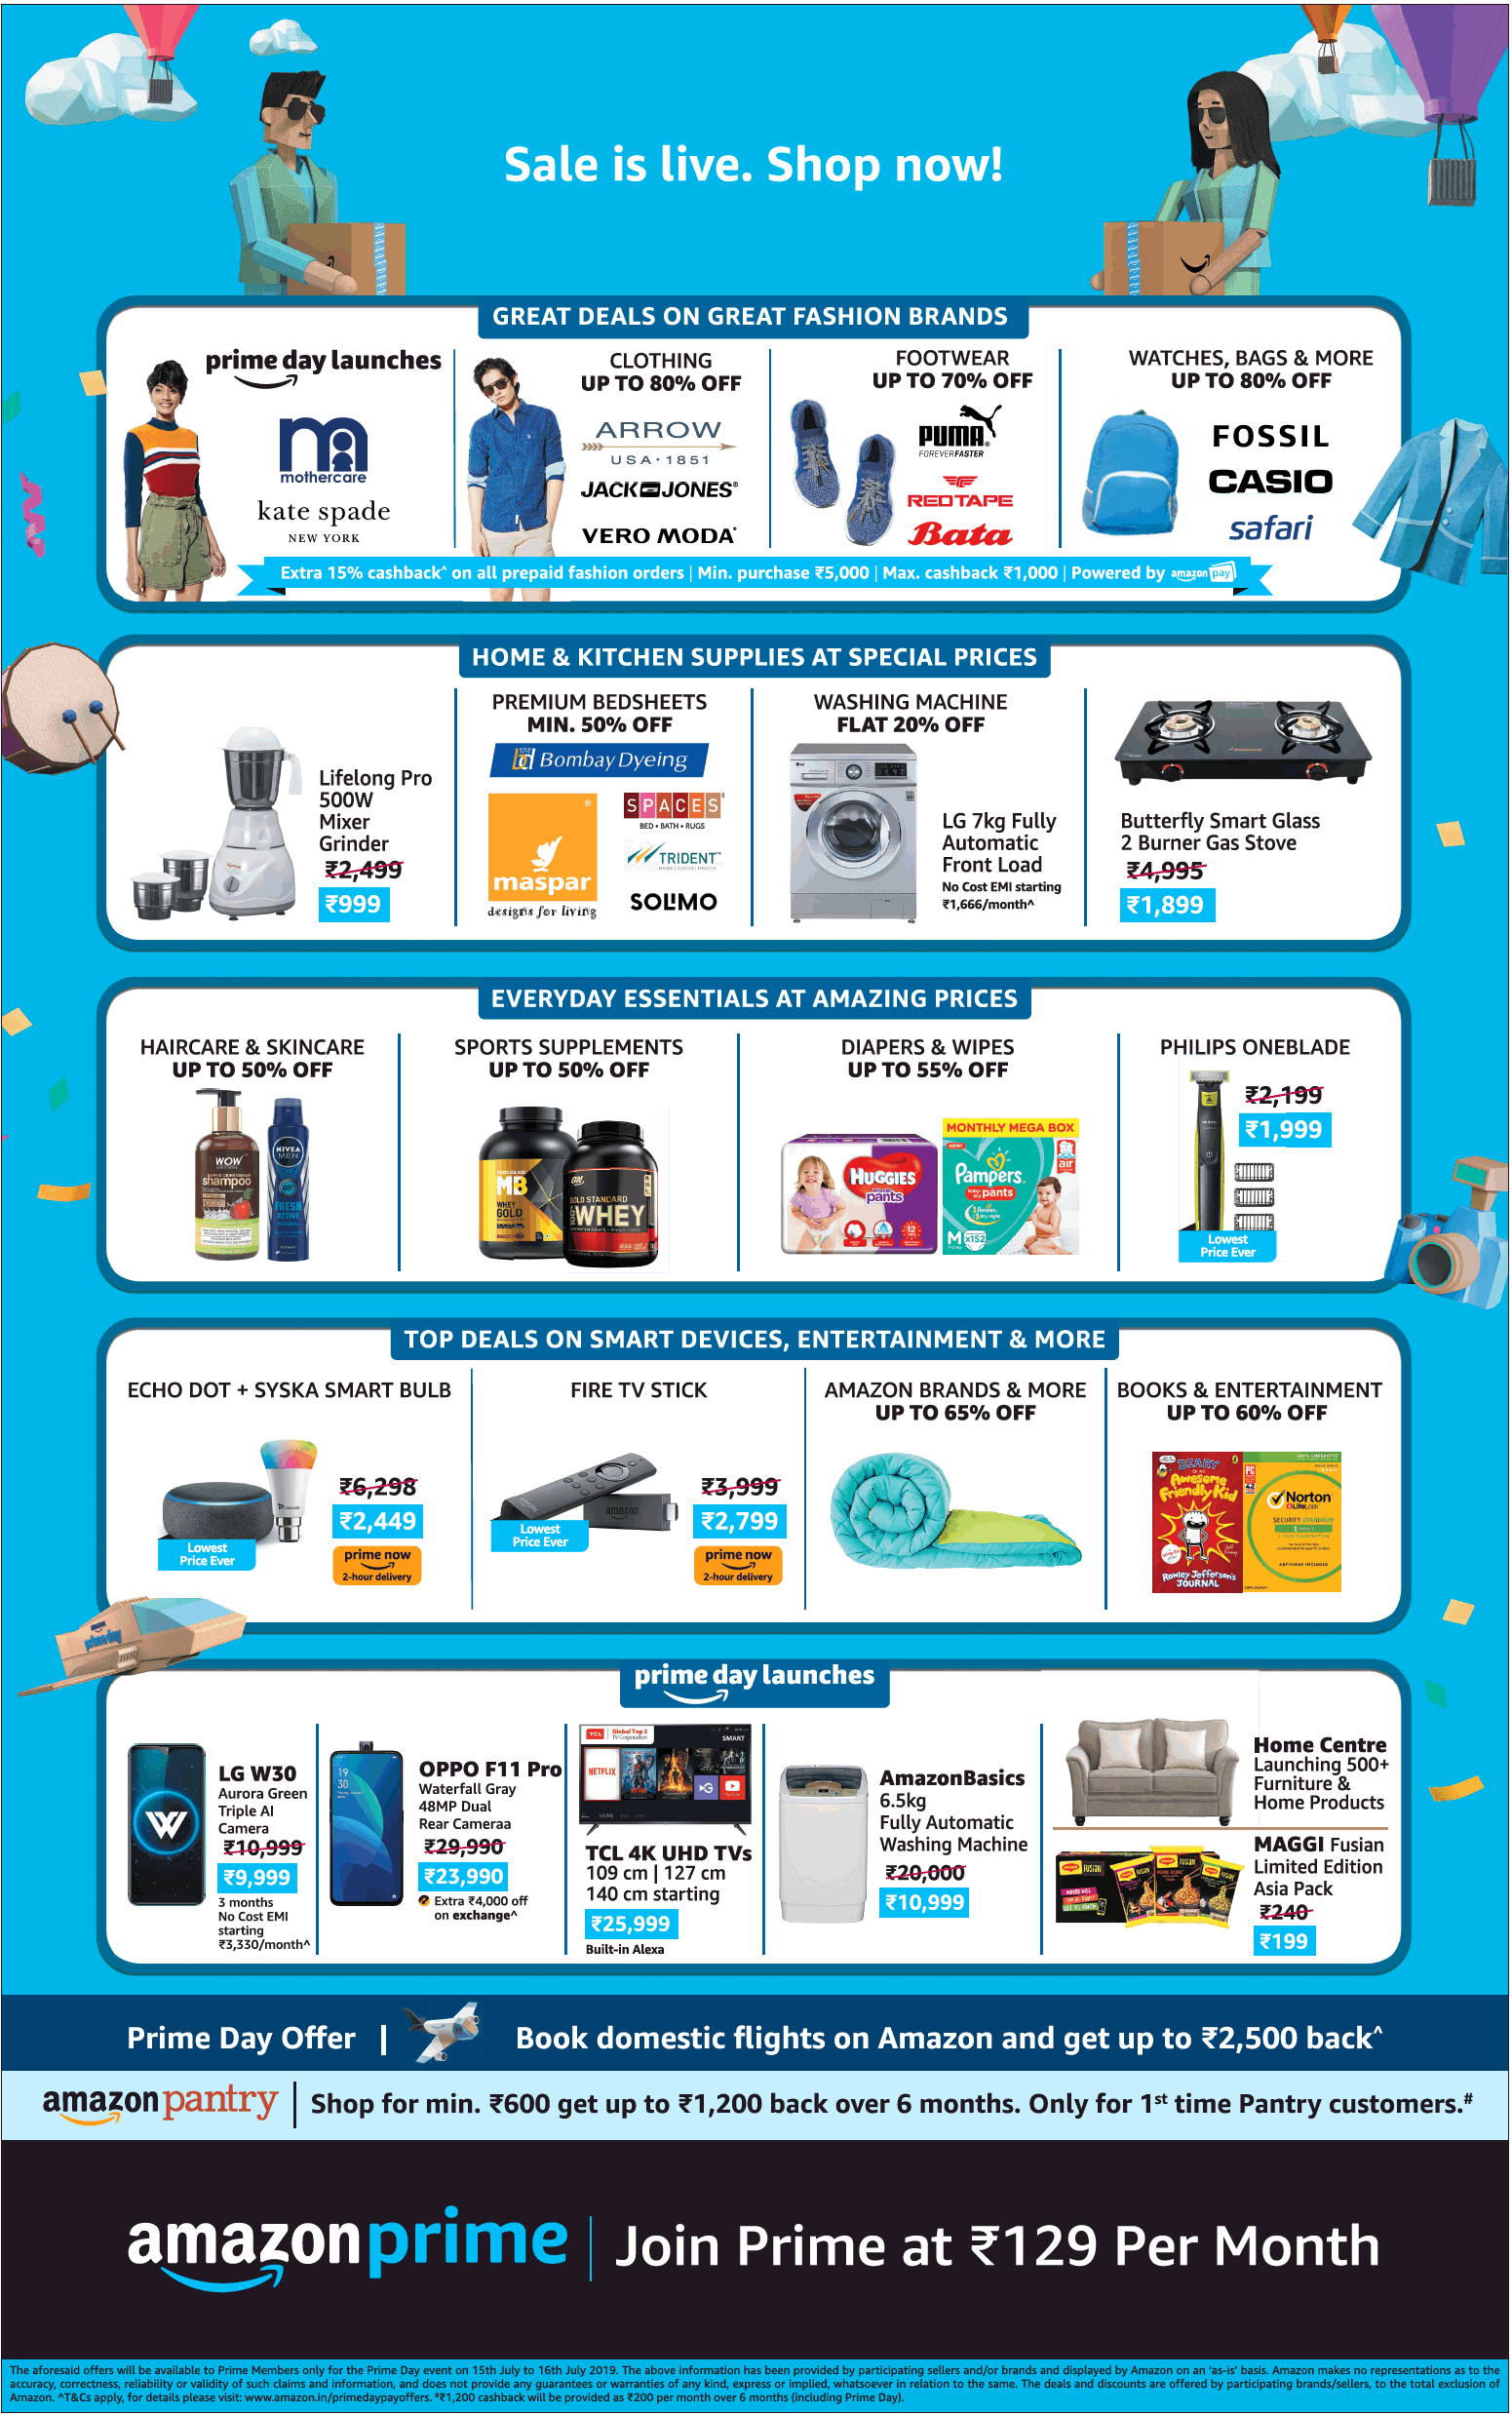 amazonprime-sale-is-live-shop-now-join-prime-at-rs-129-per-month-ad-times-of-india-delhi-14-07-2019.png